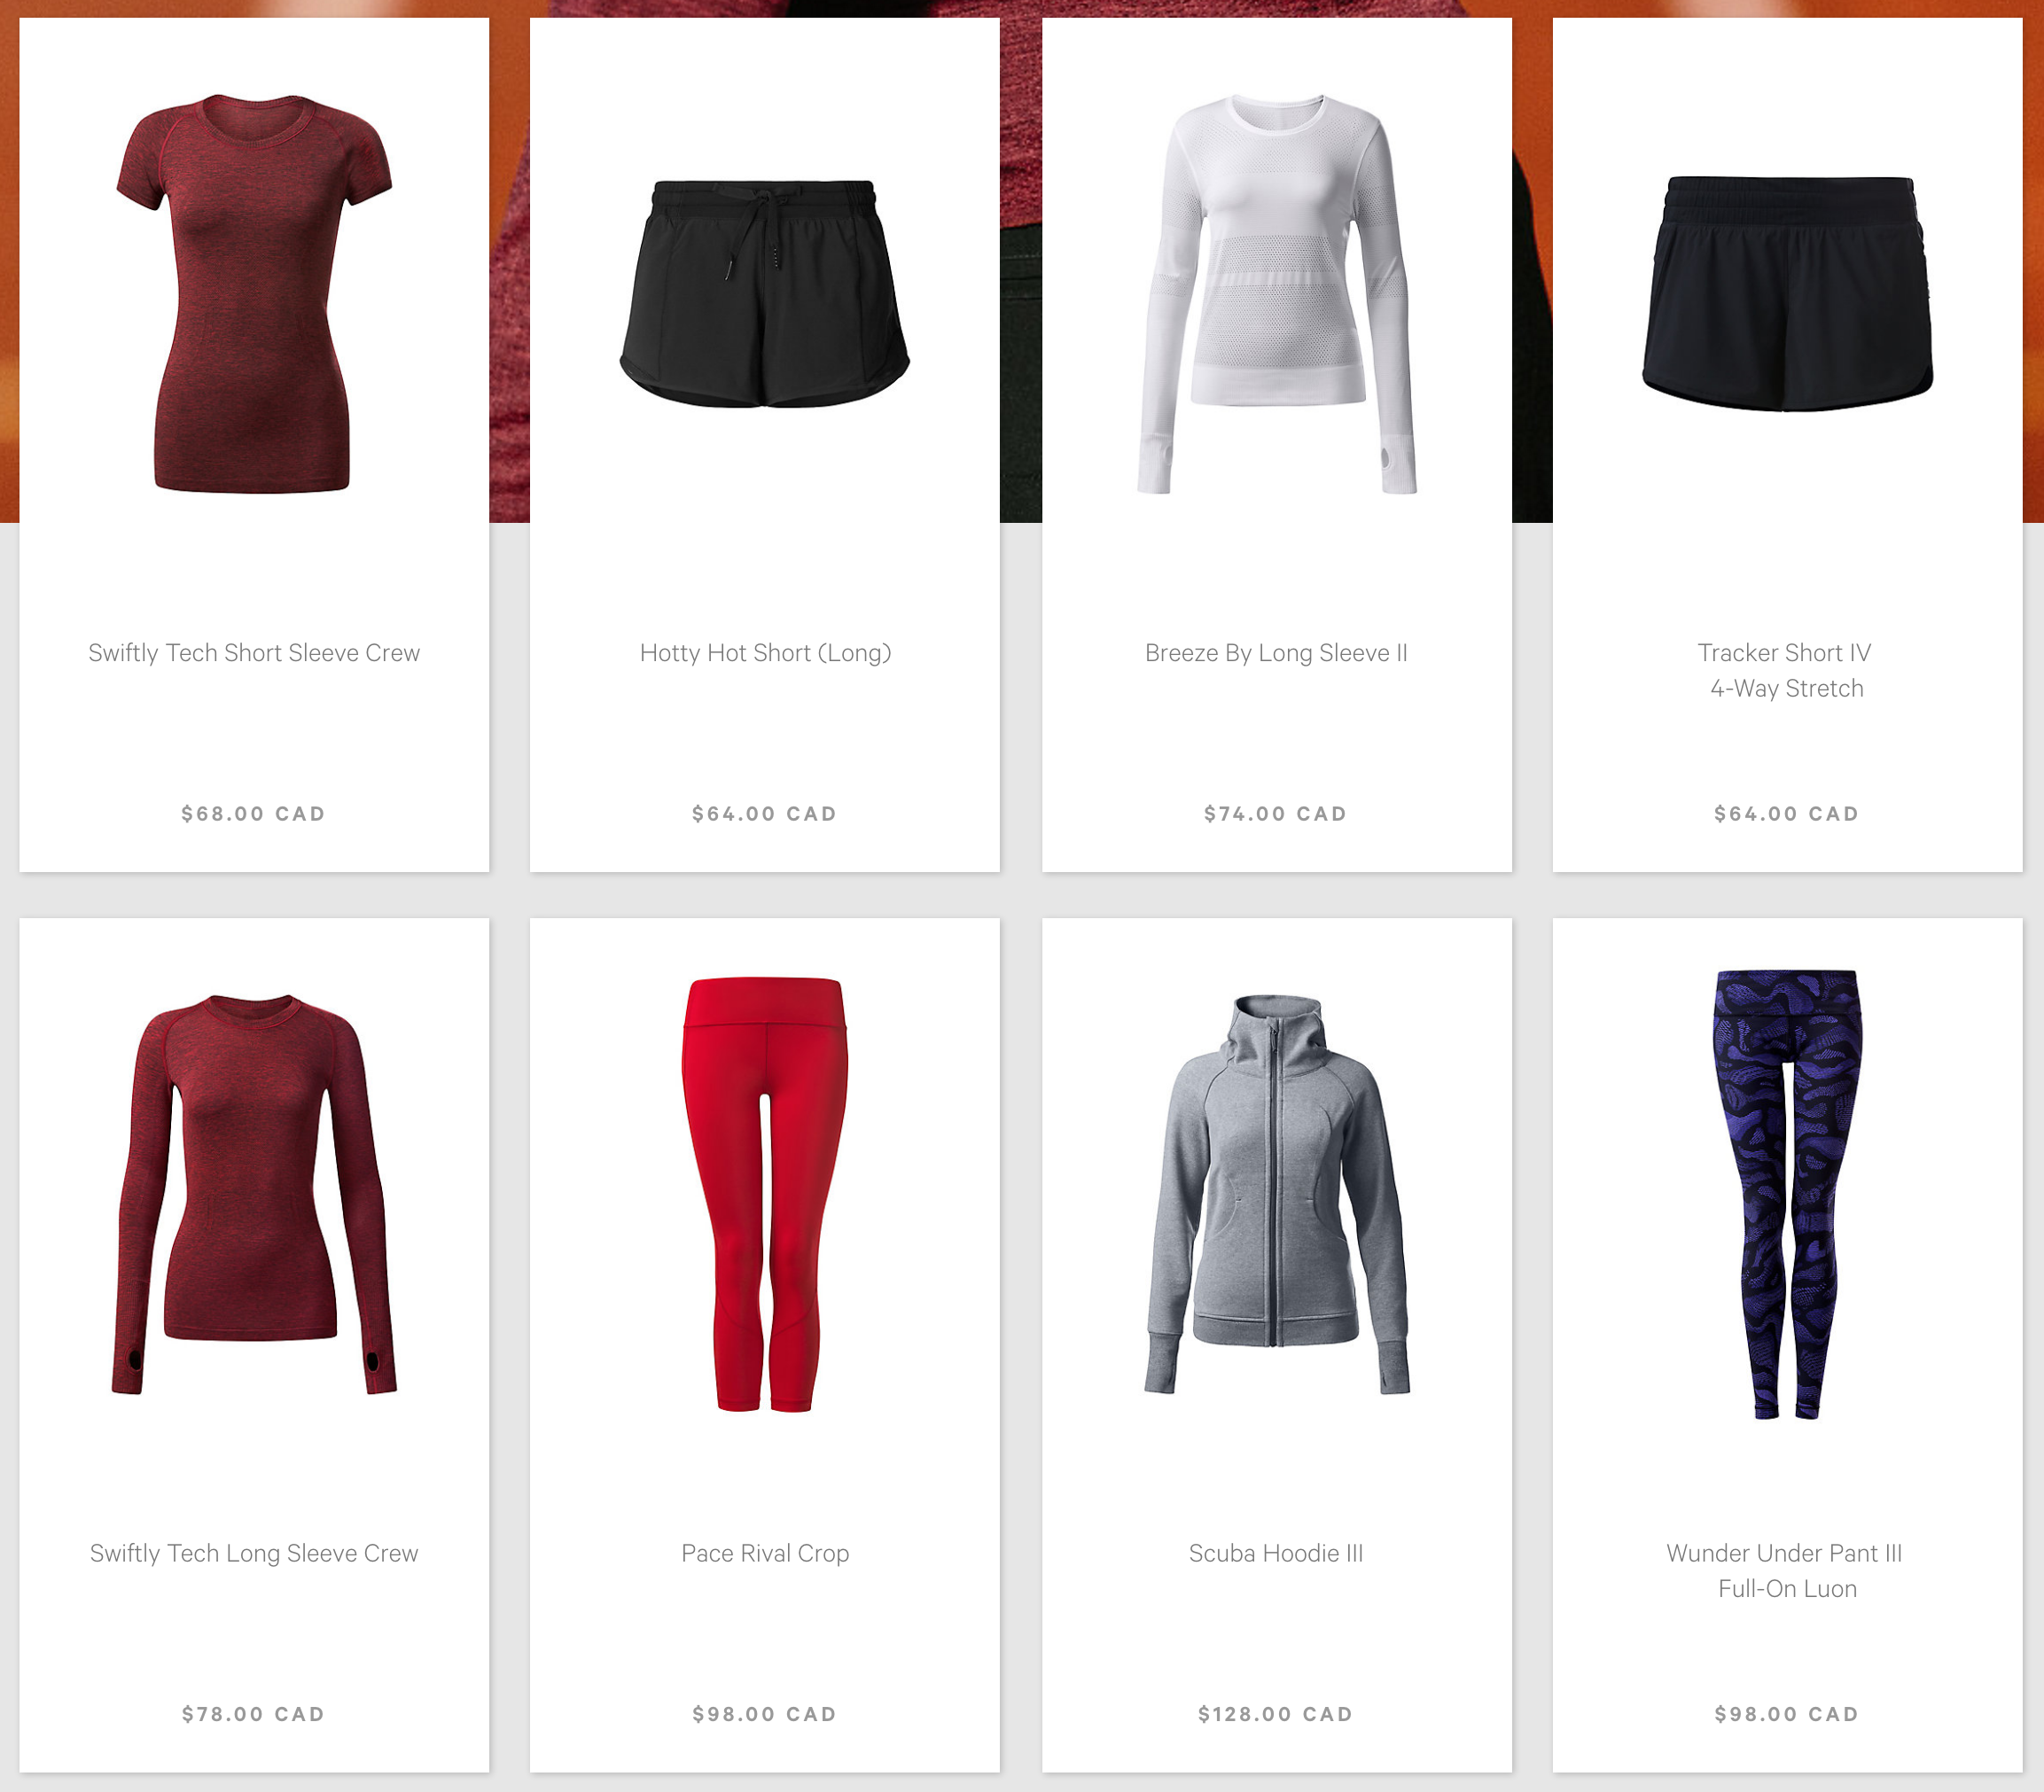 Lululemon Prices Increase, Again - Agent Athletica